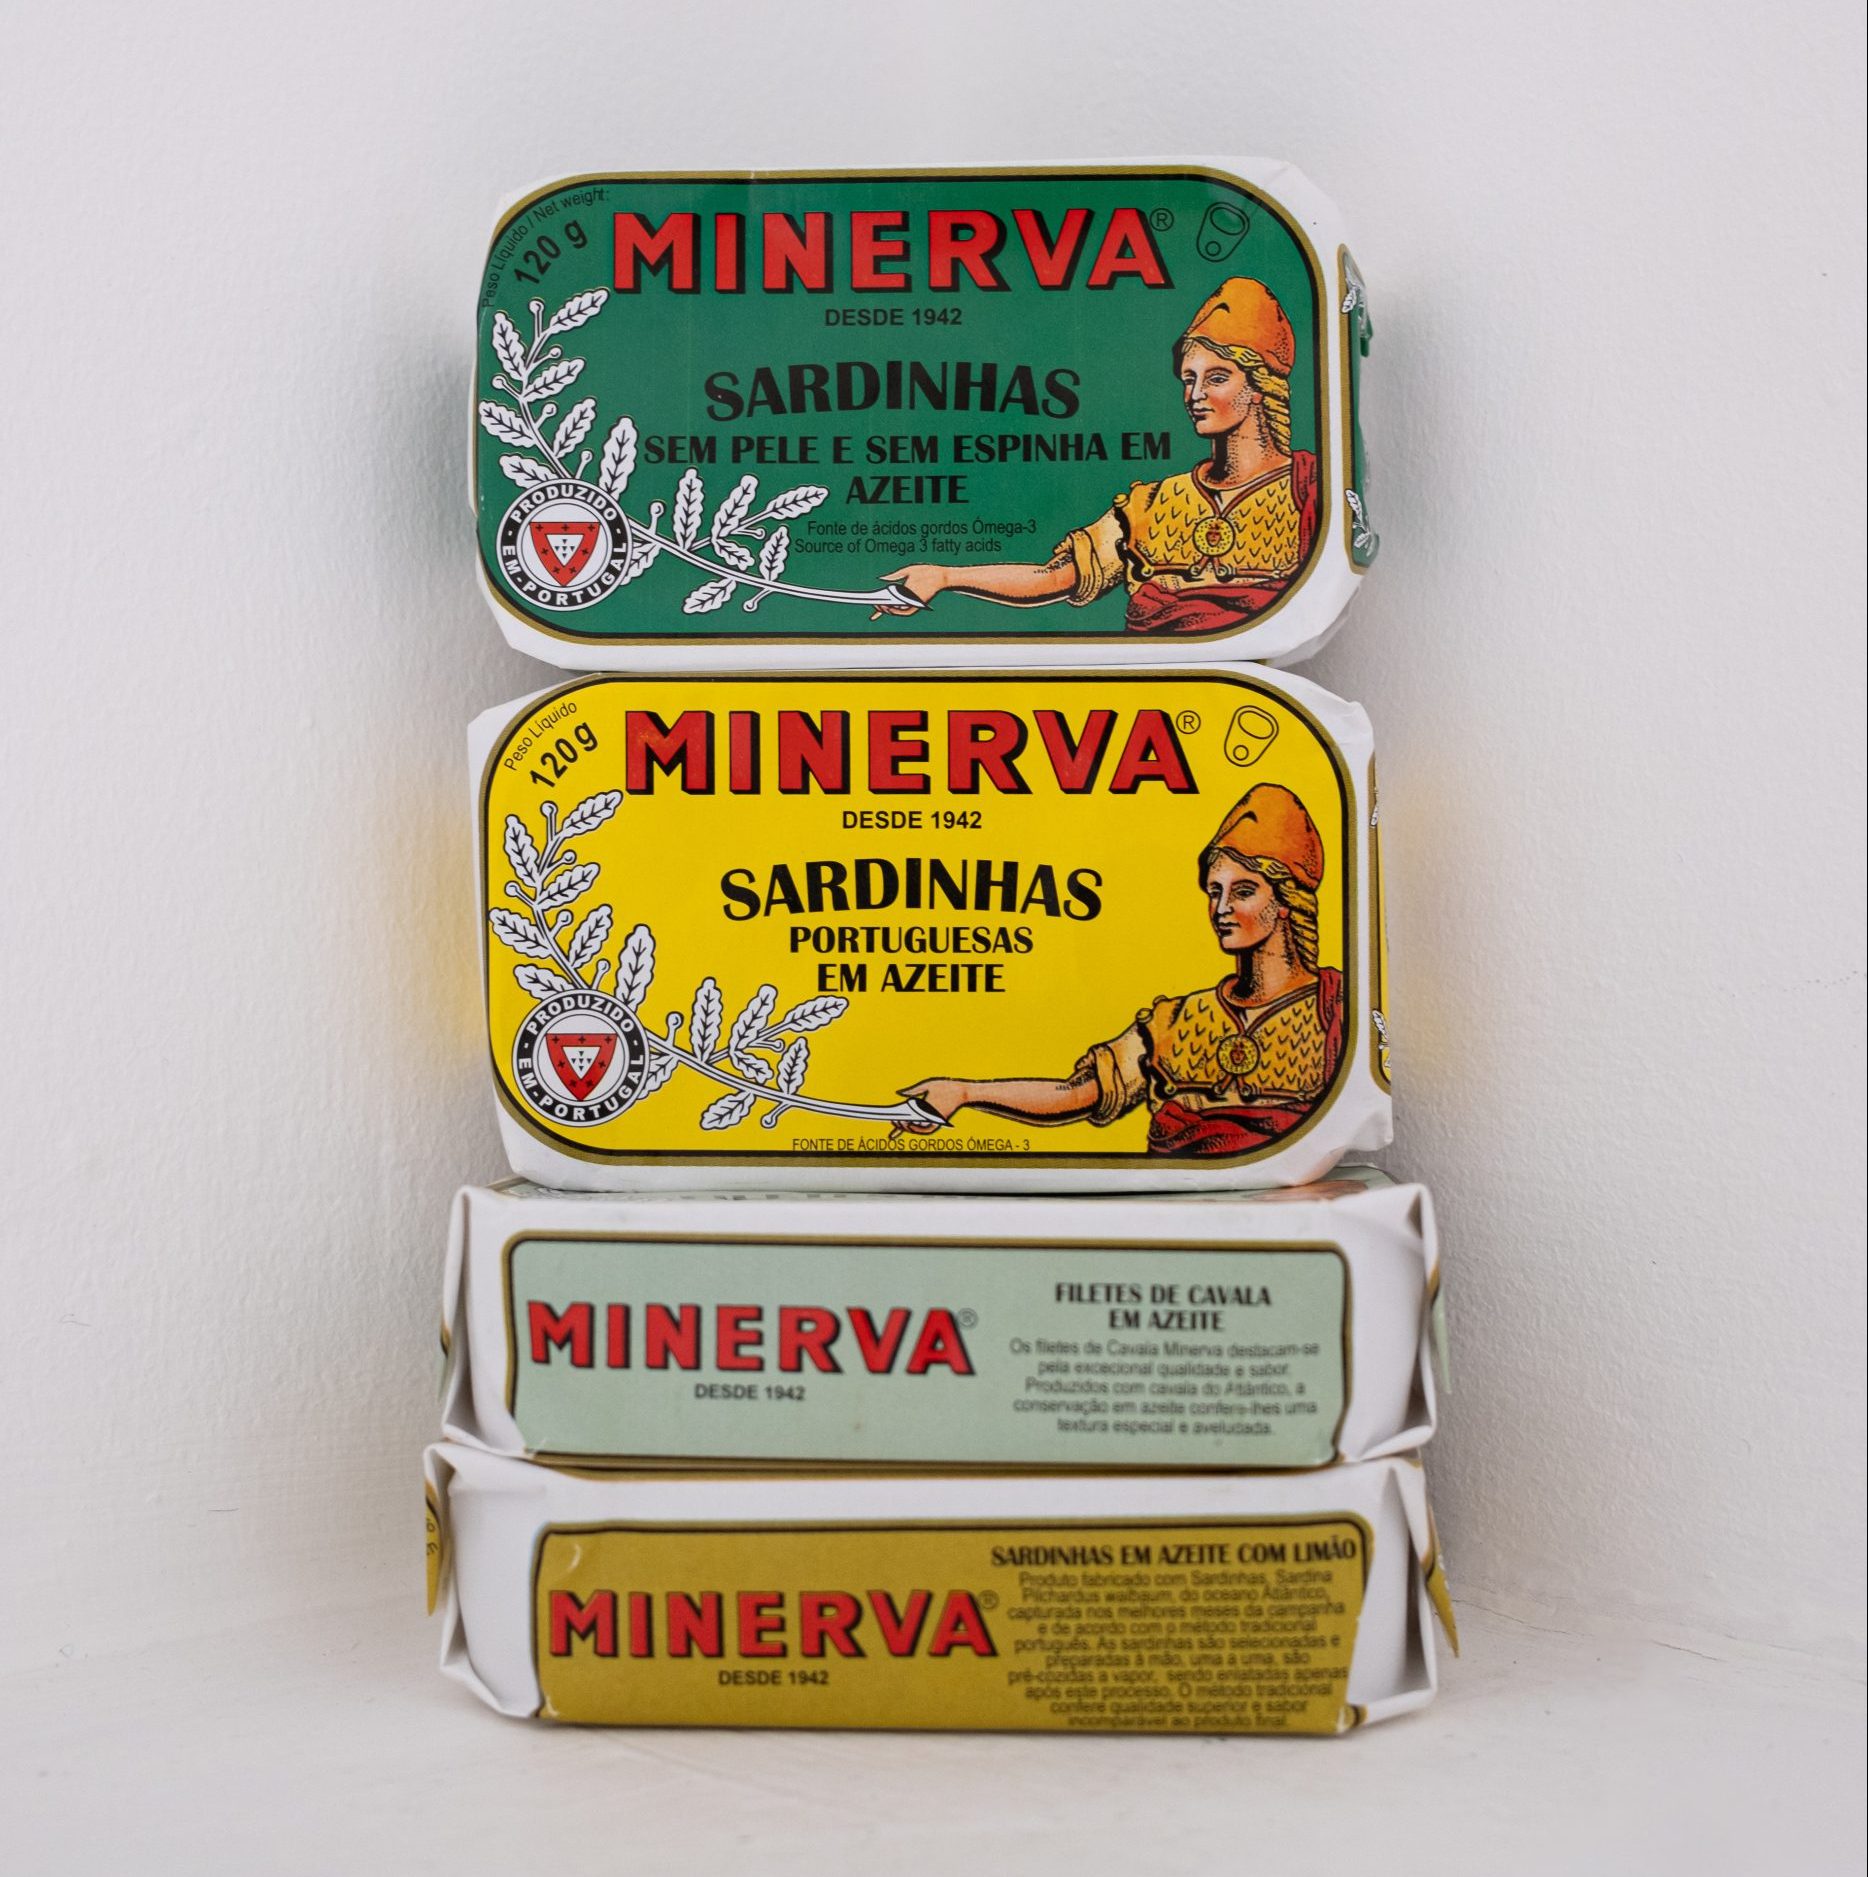 A stack of Minerva tinned fish at Panzer's Deli